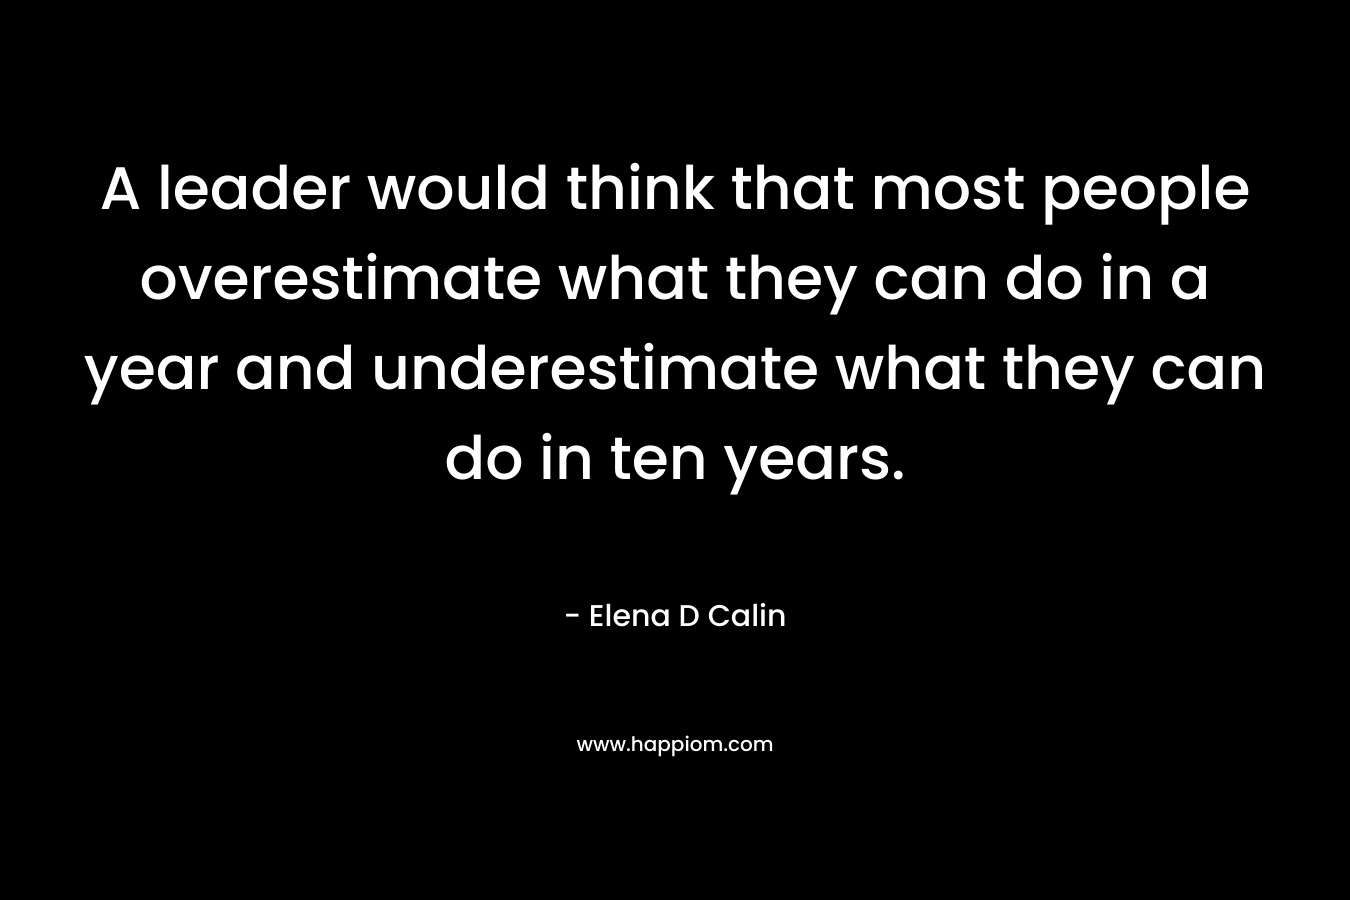 A leader would think that most people overestimate what they can do in a year and underestimate what they can do in ten years. – Elena D Calin